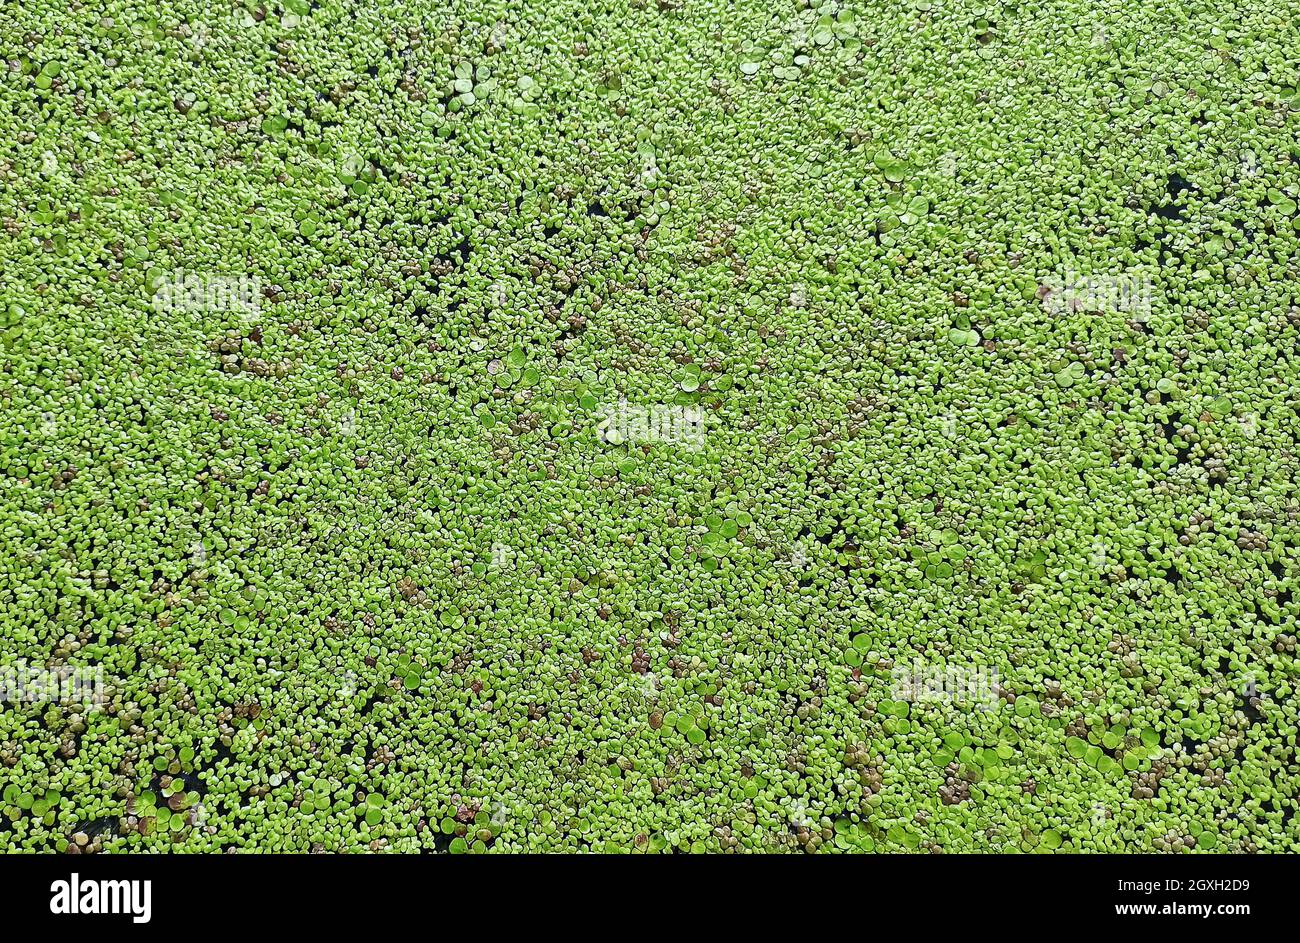 Texture from Common Duckweed on water. Natural green texture. Lemna perpusilla Torrey. Green leaf Duckweed. Natural background. Green leaves of plant. Stock Photo